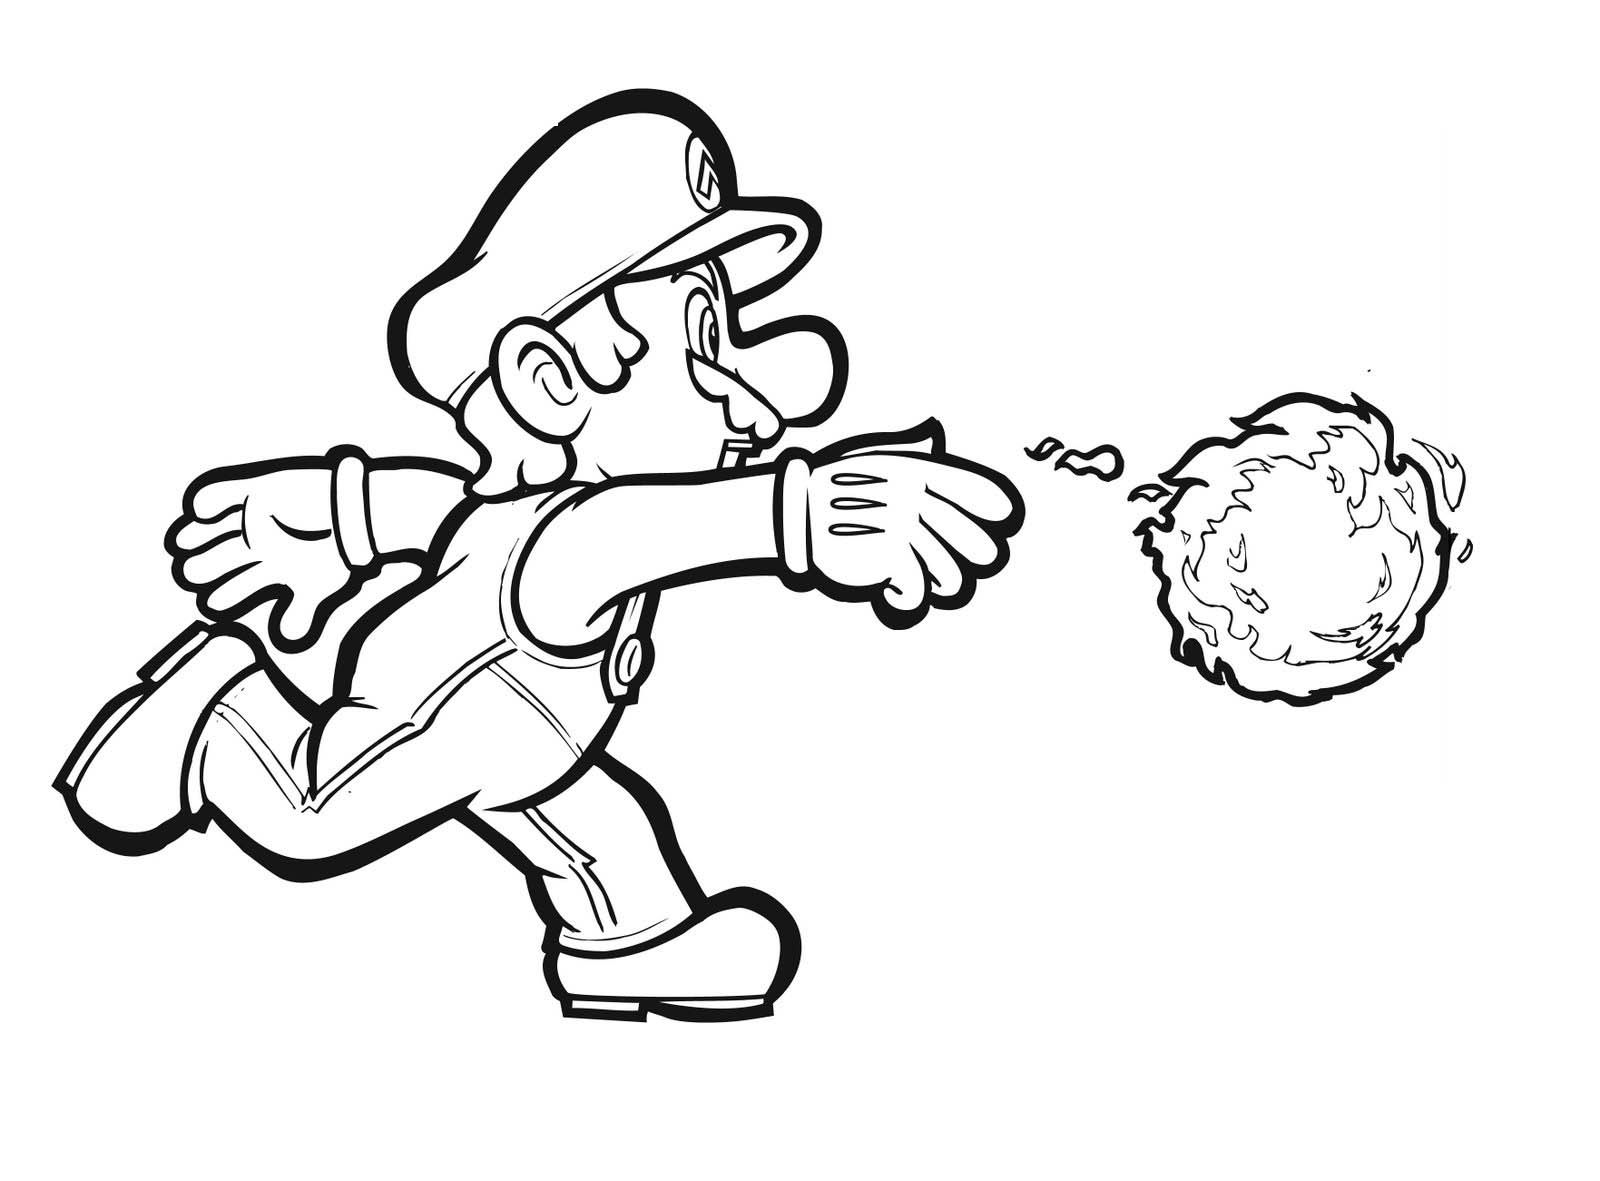 Mario Kart - Coloring Pages for Kids and for Adults